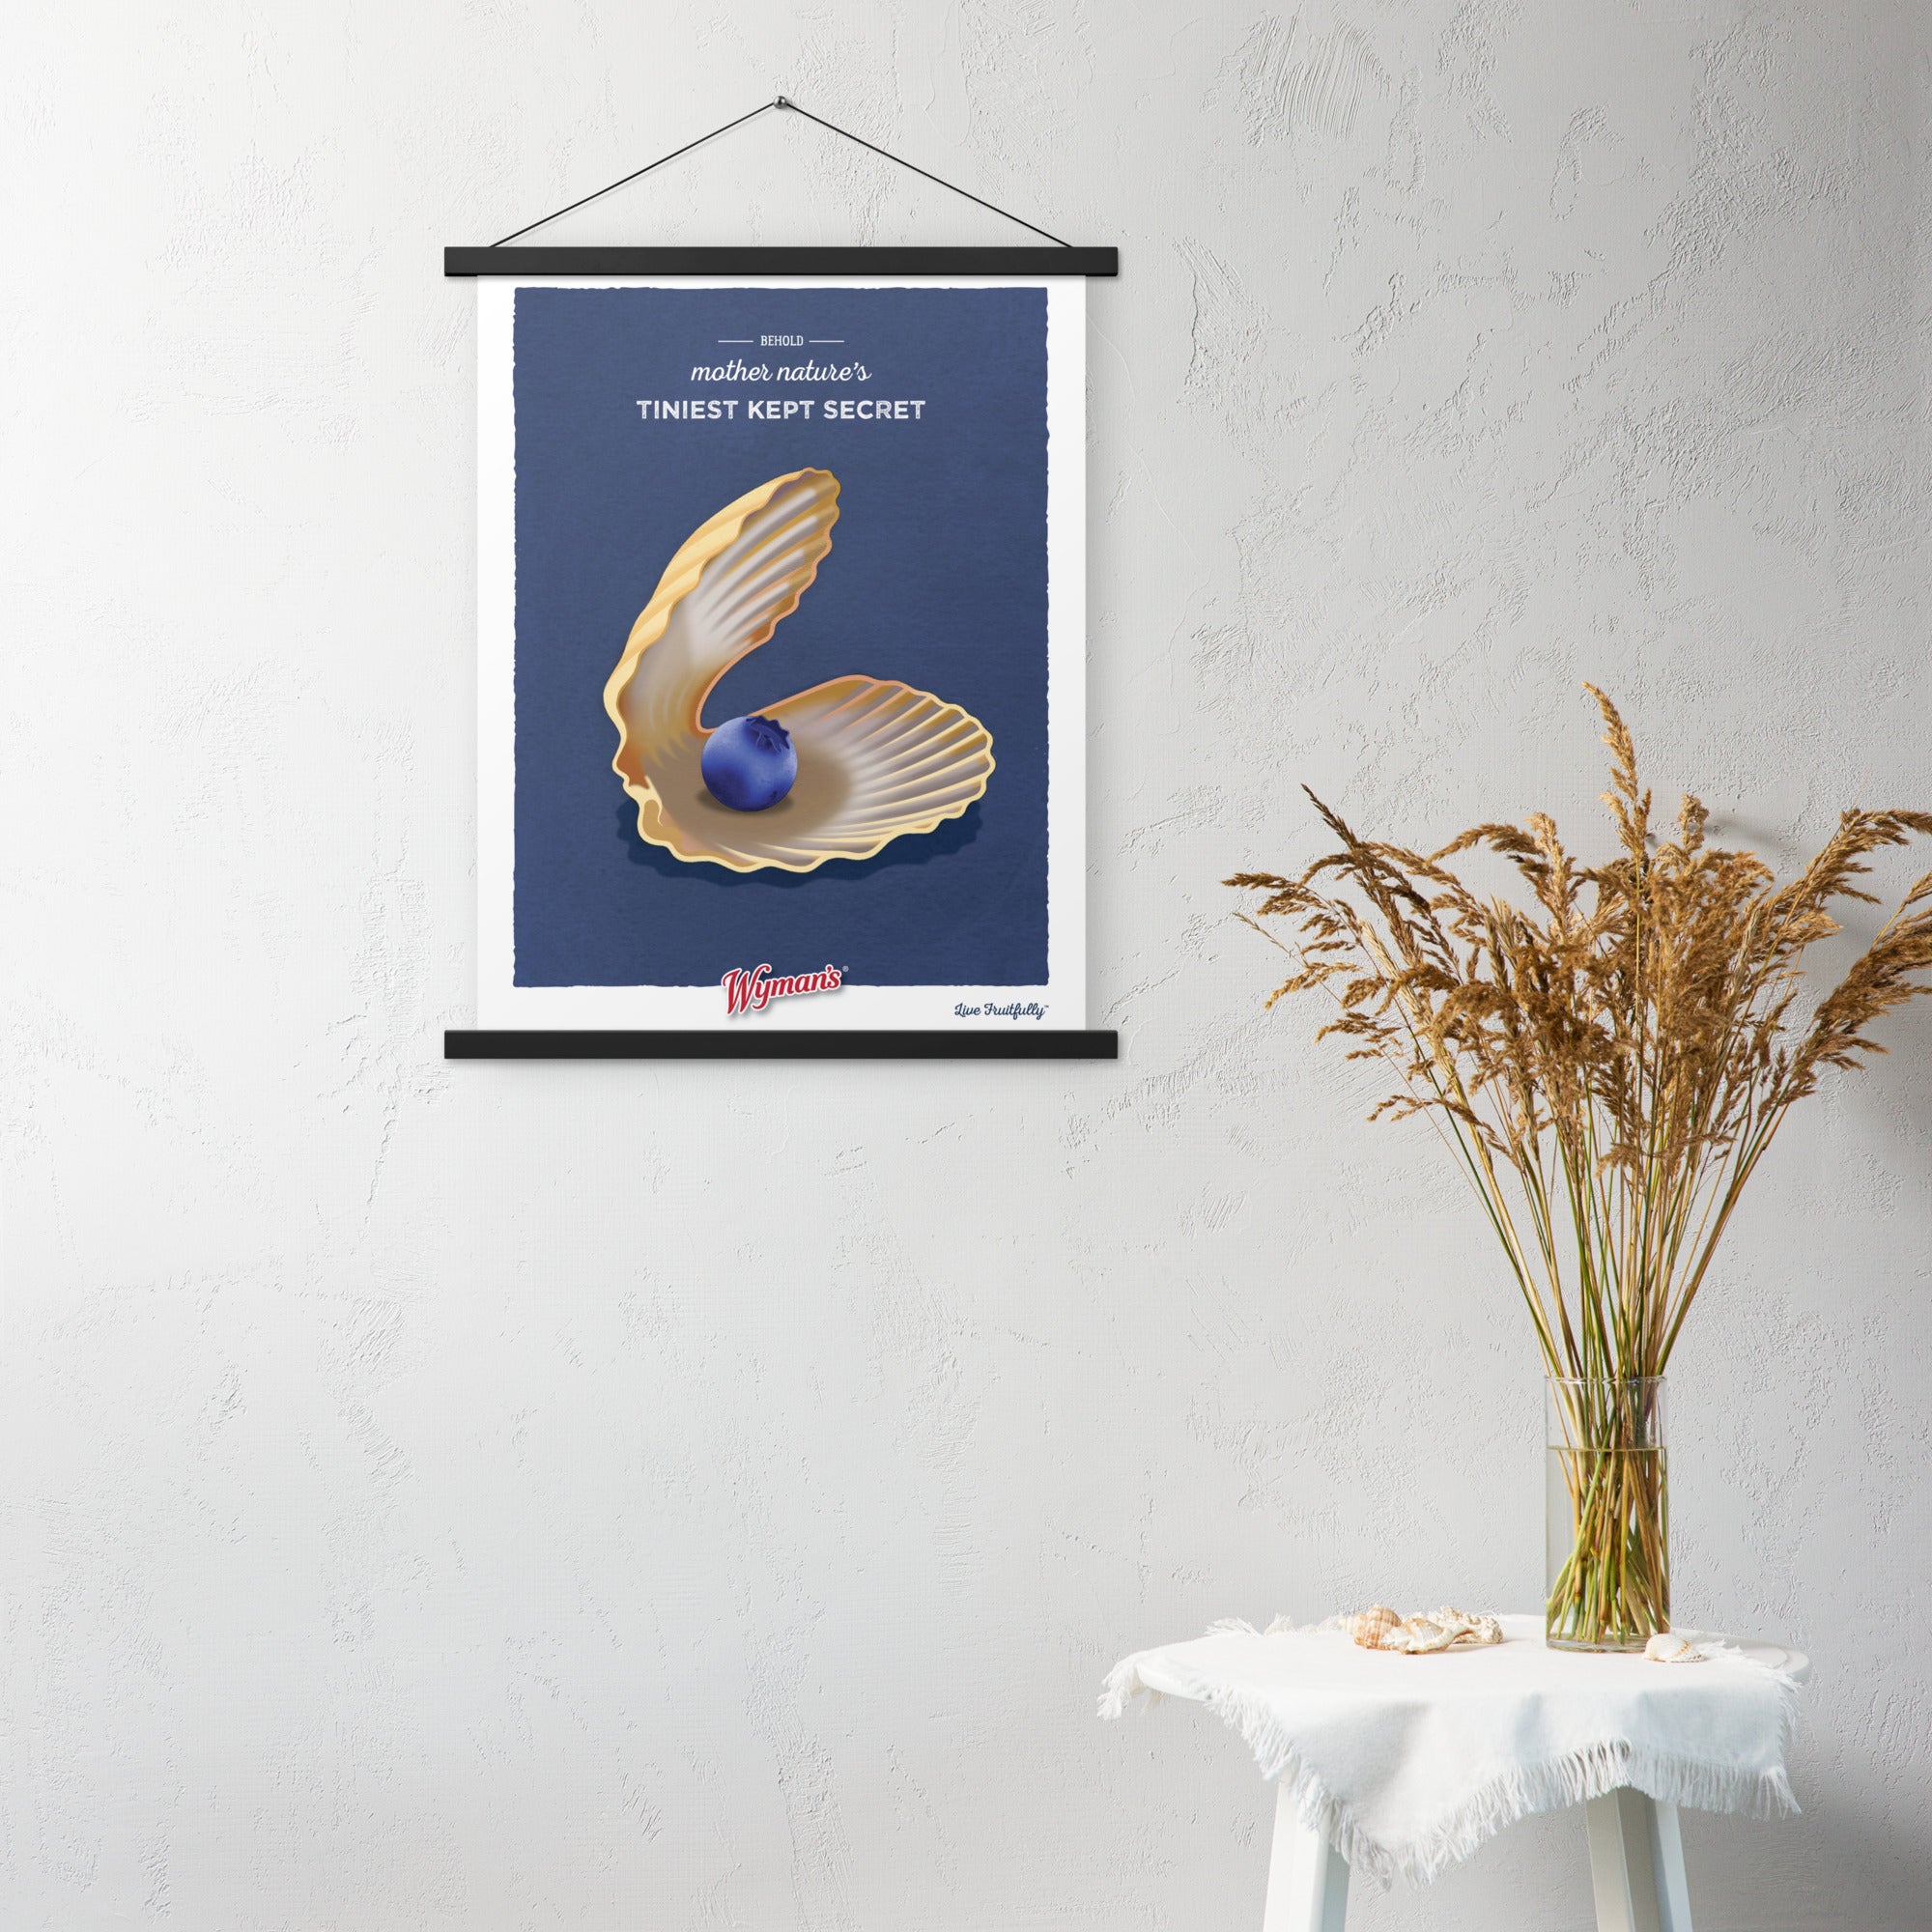 A Behold Mother Nature's Tiniest Kept Secret poster, designed with blueberry hues, hanging on a wall from Shop Wyman's.